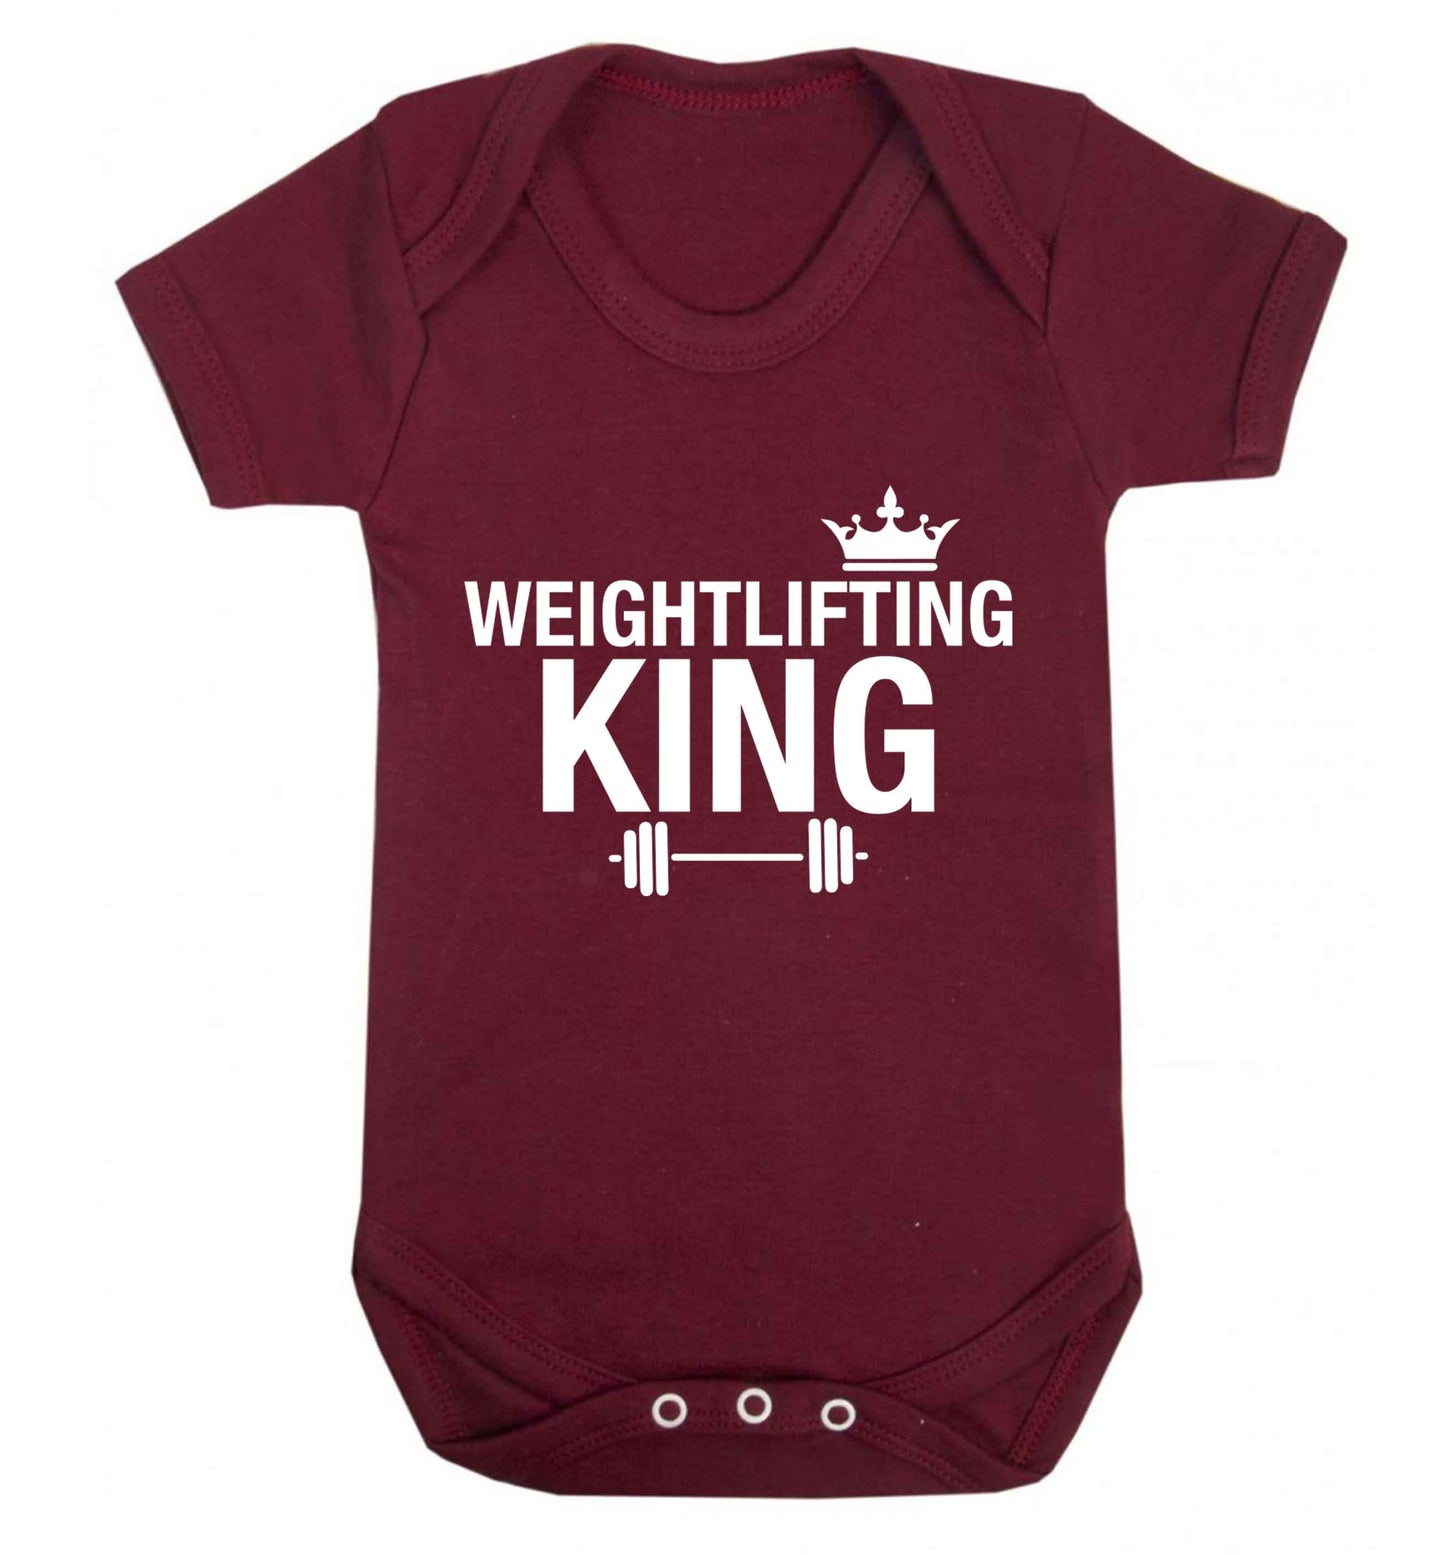 Weightlifting king Baby Vest maroon 18-24 months